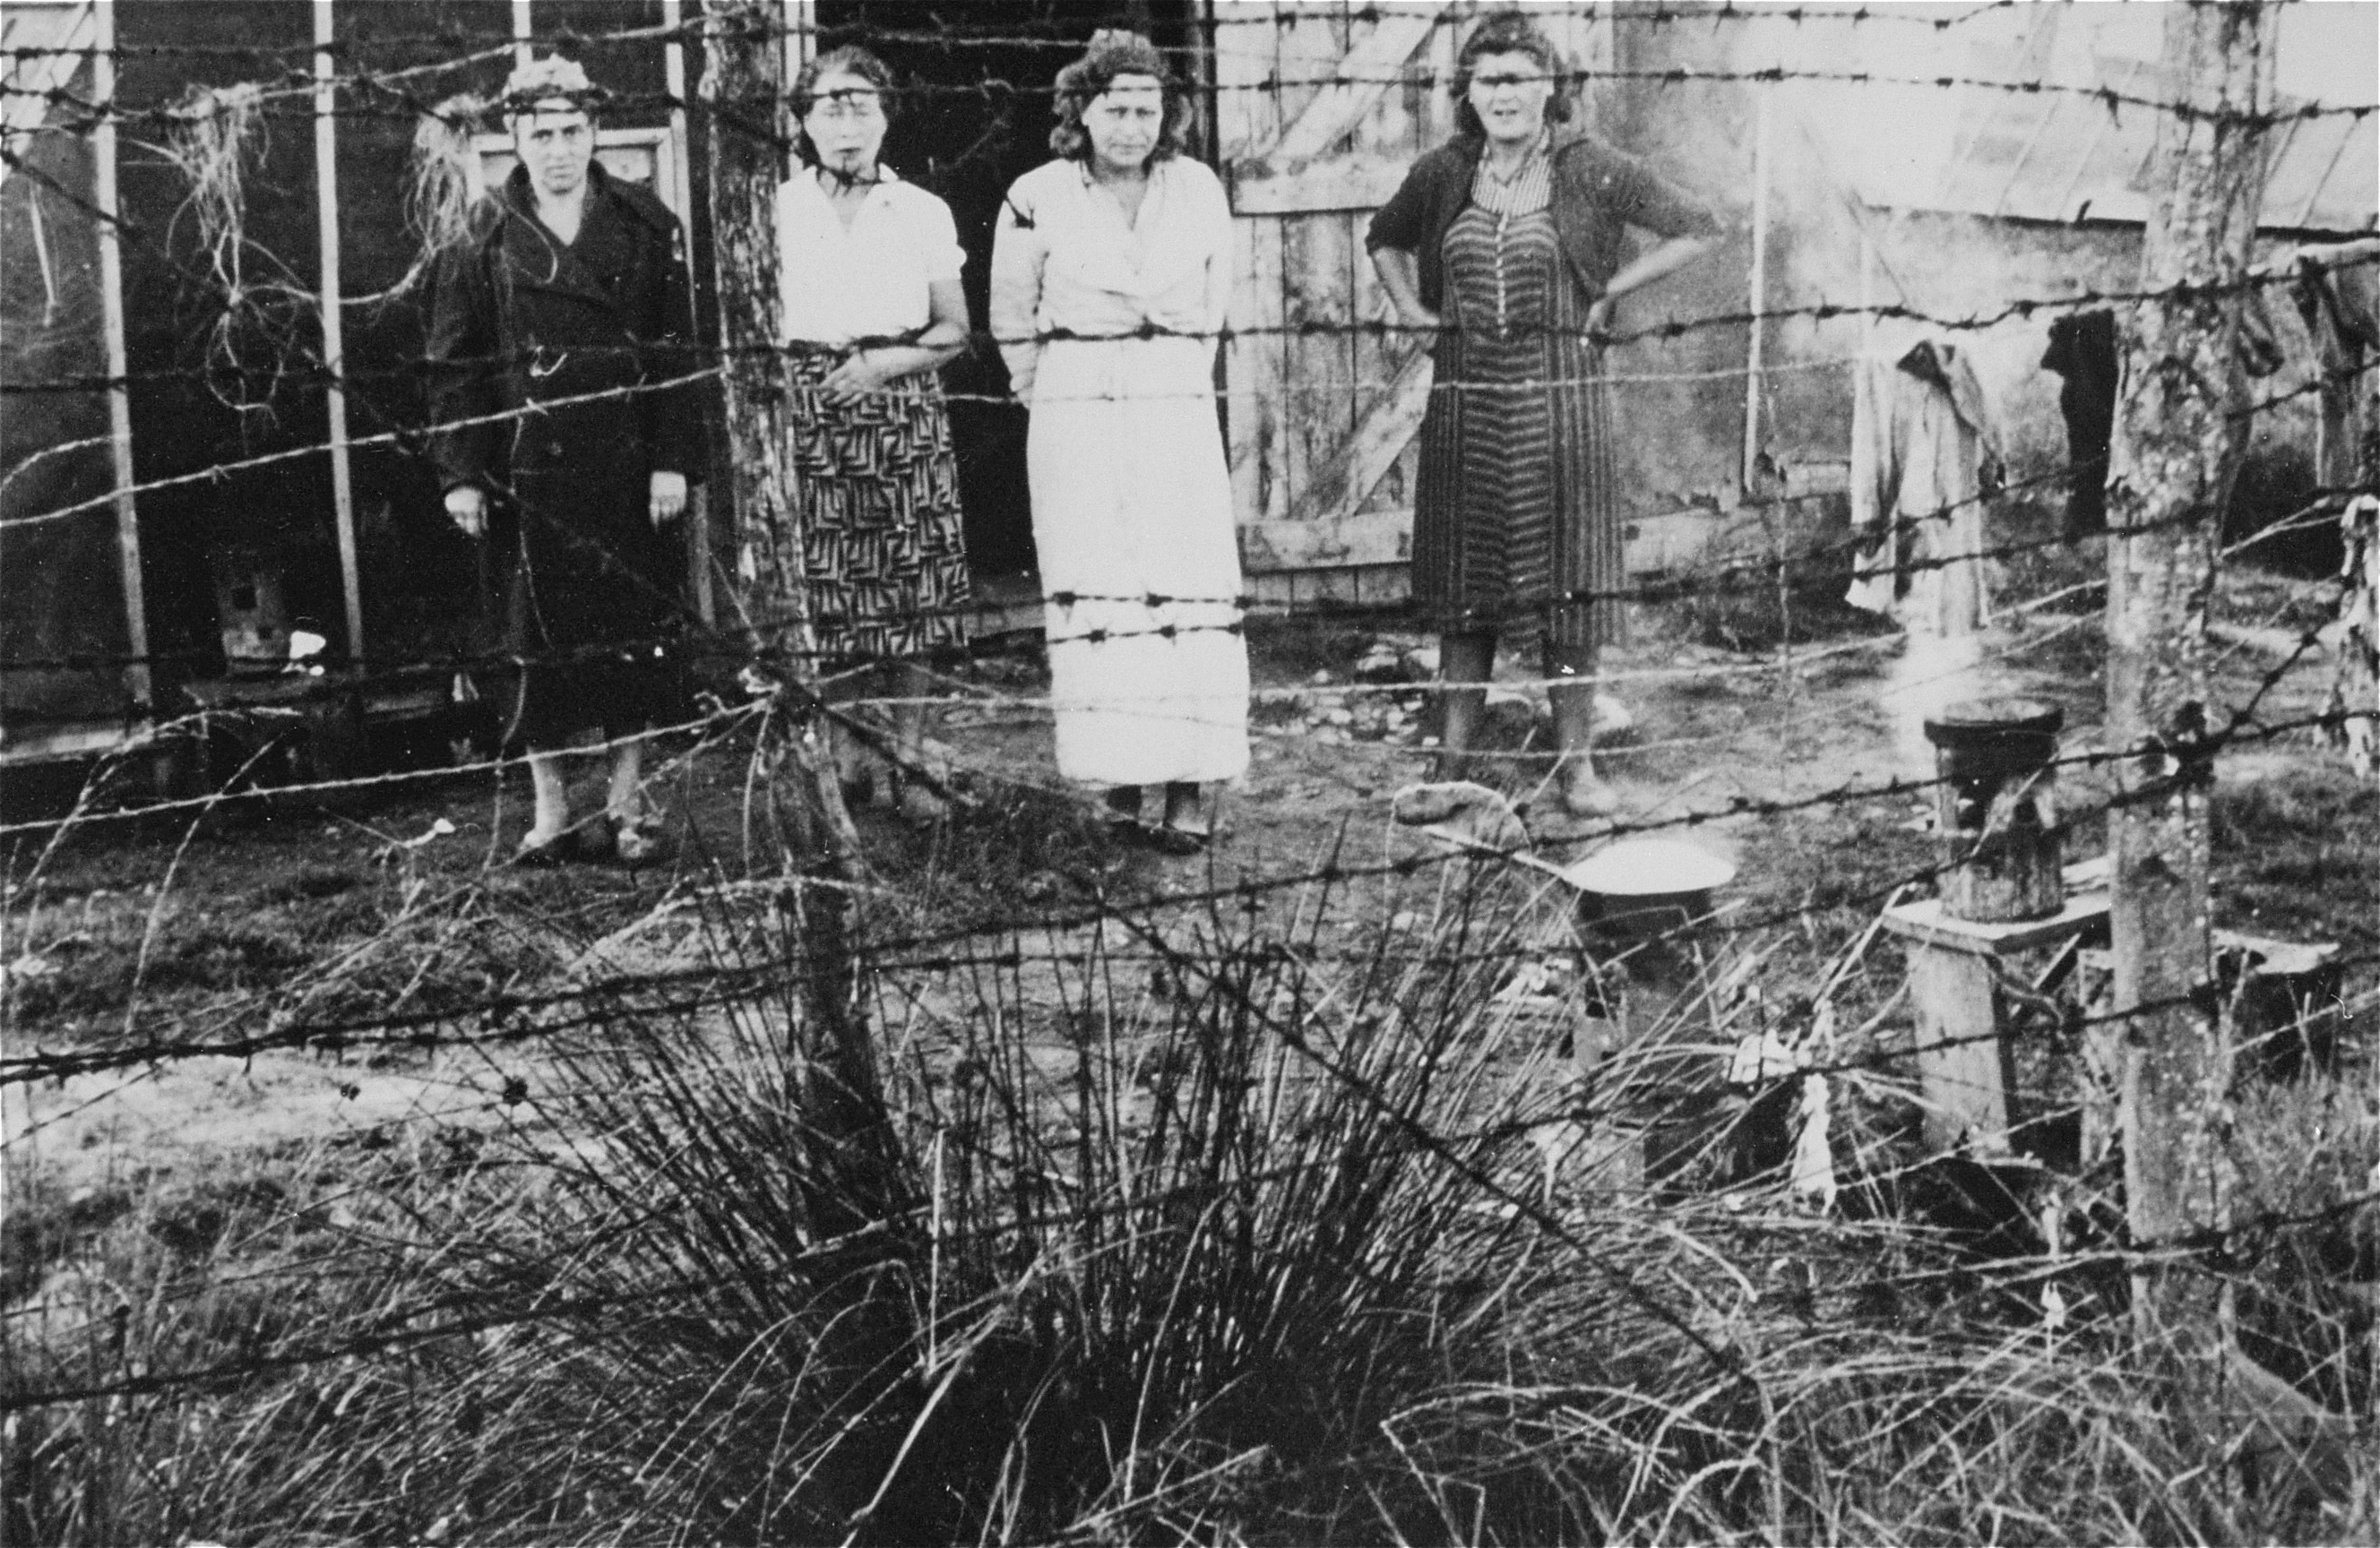 Four female prisoners stand outside a barracks behind a barbed-wire fence in 